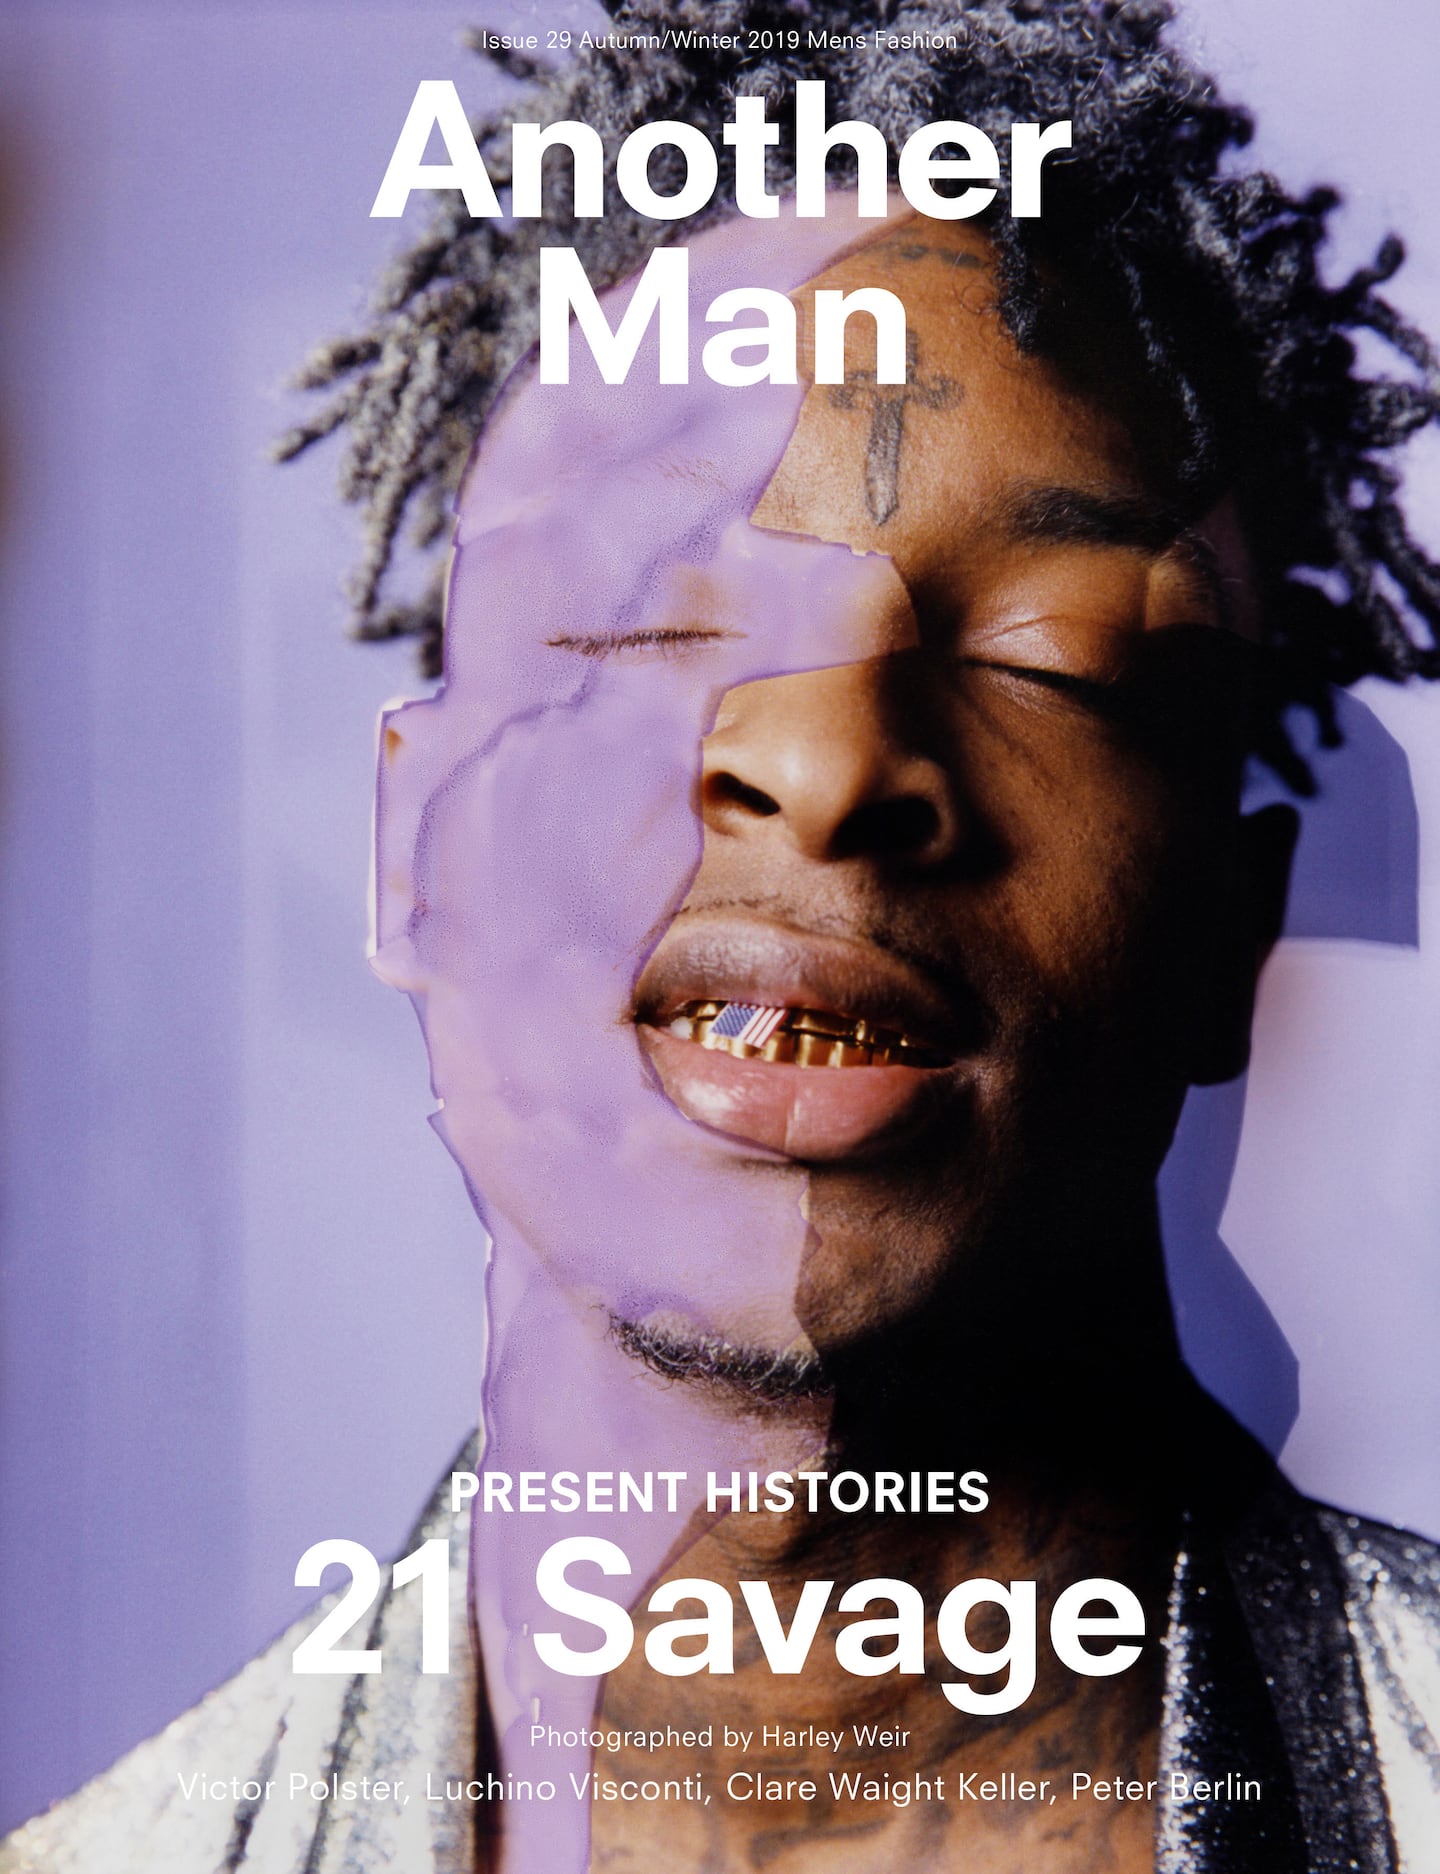 The original Another Man publication produced 30 print editions until 2021, featuring cover stars including 21 Savage, Skepta and Harry Styles.